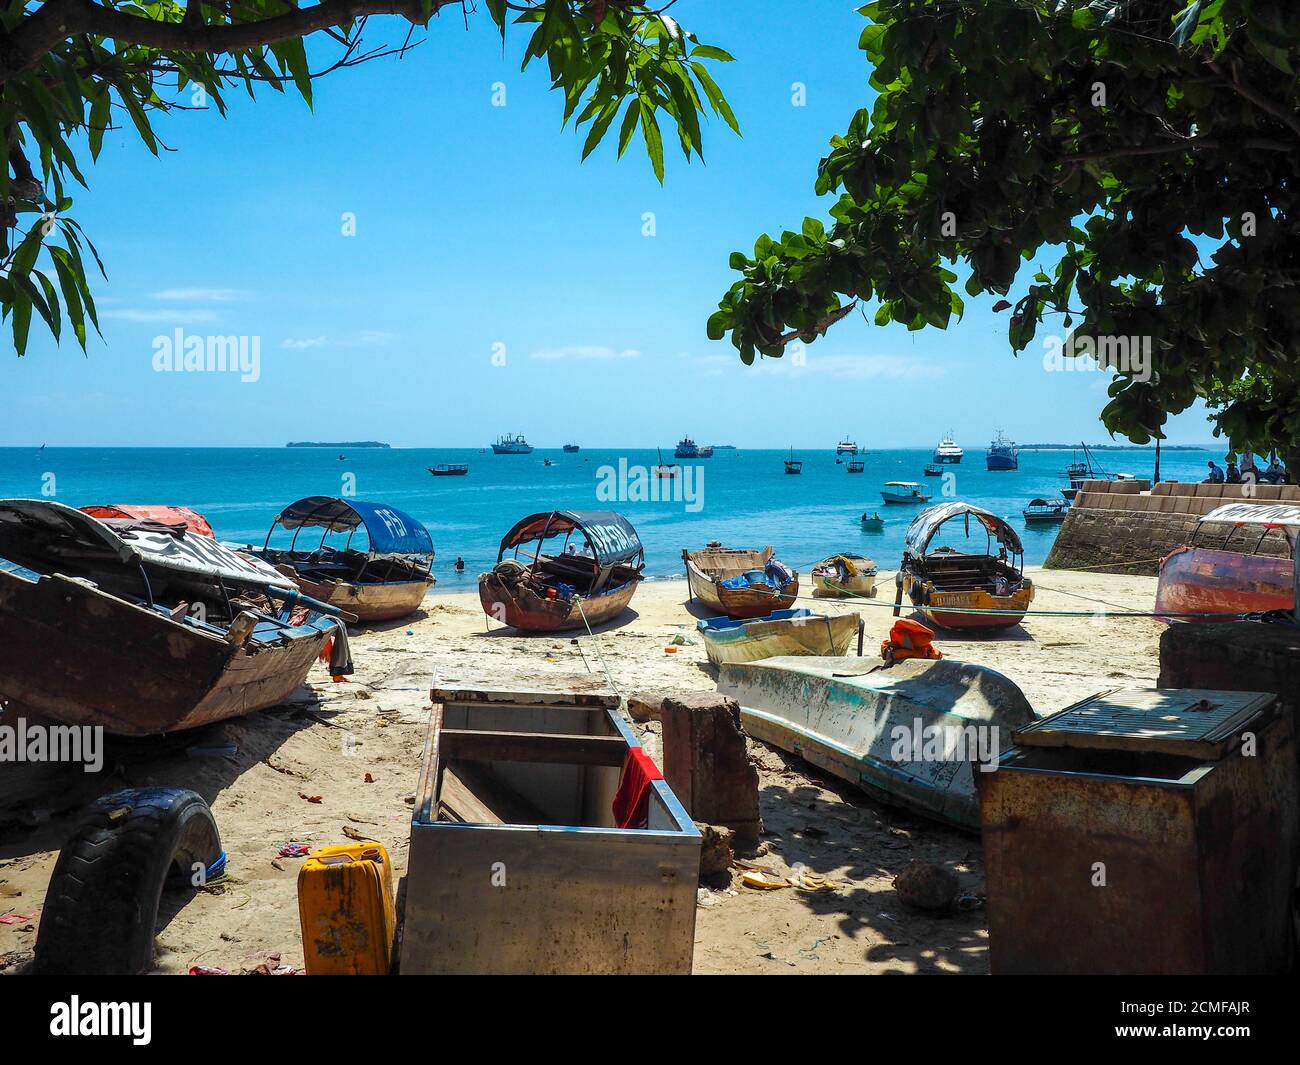 Fishing boats and crystal clear turquoise waters at stone town on the island of zanzibar. Stock Photo